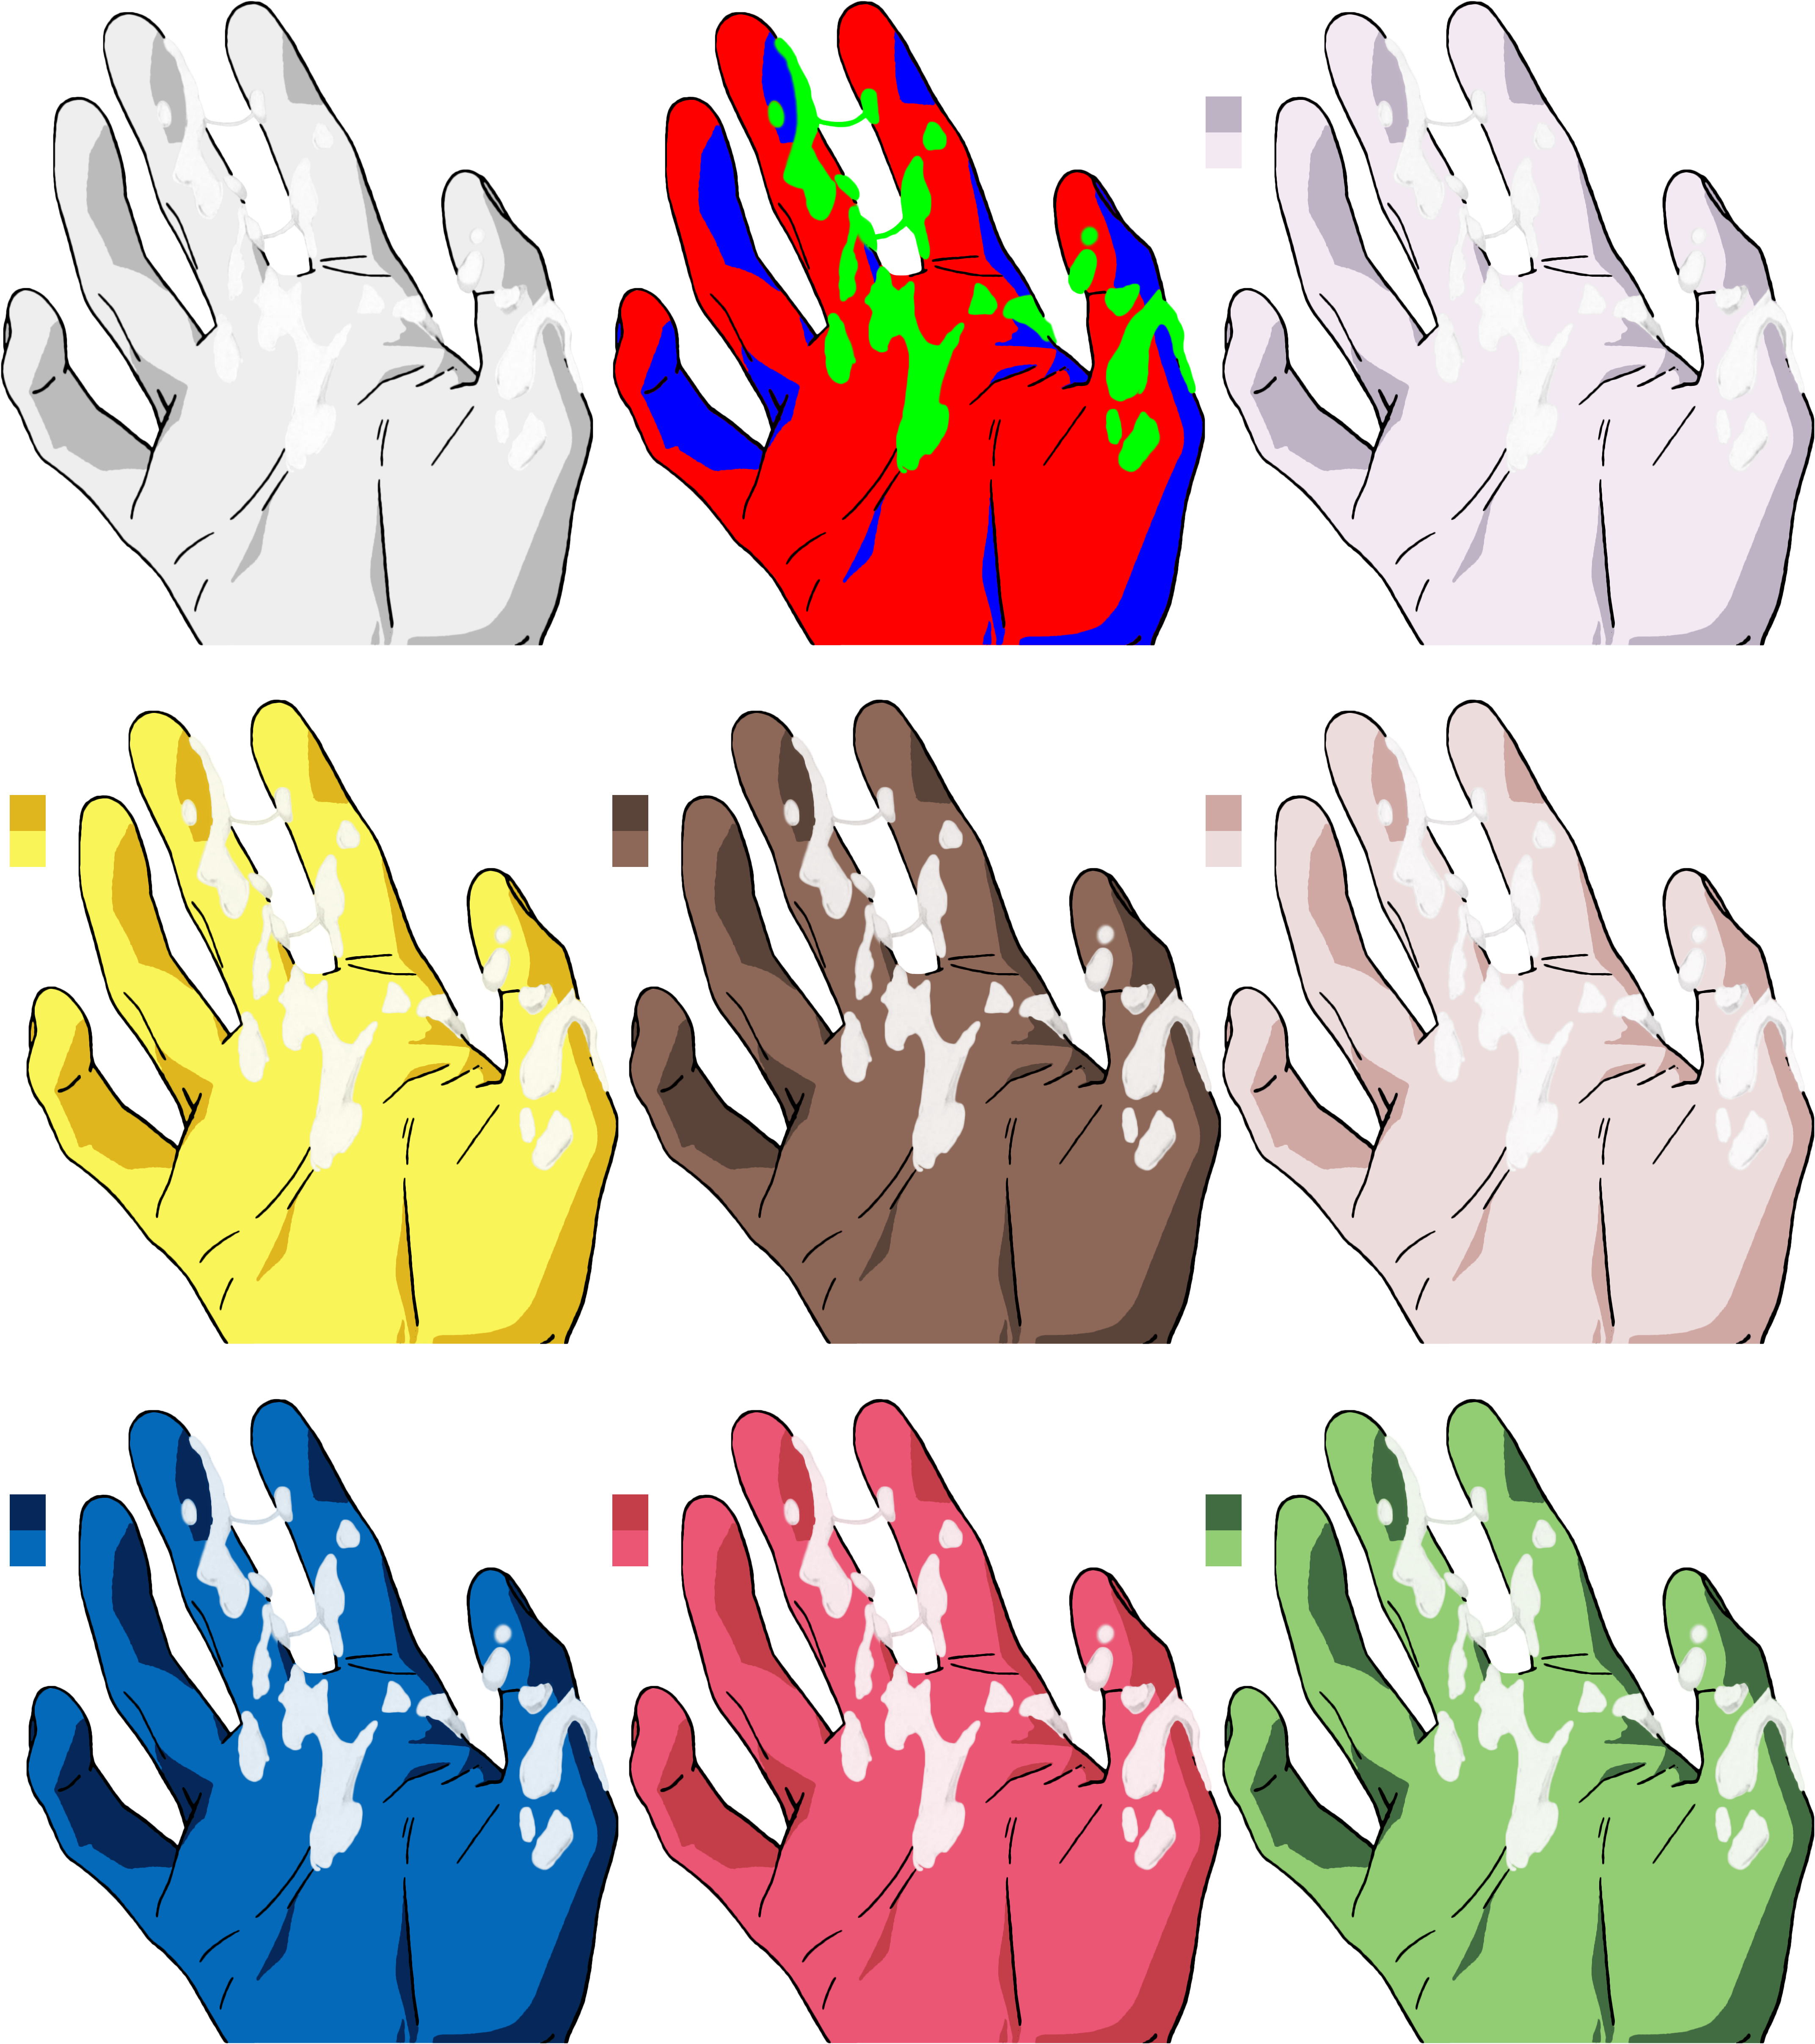 A Set Of Hands With Different Colors